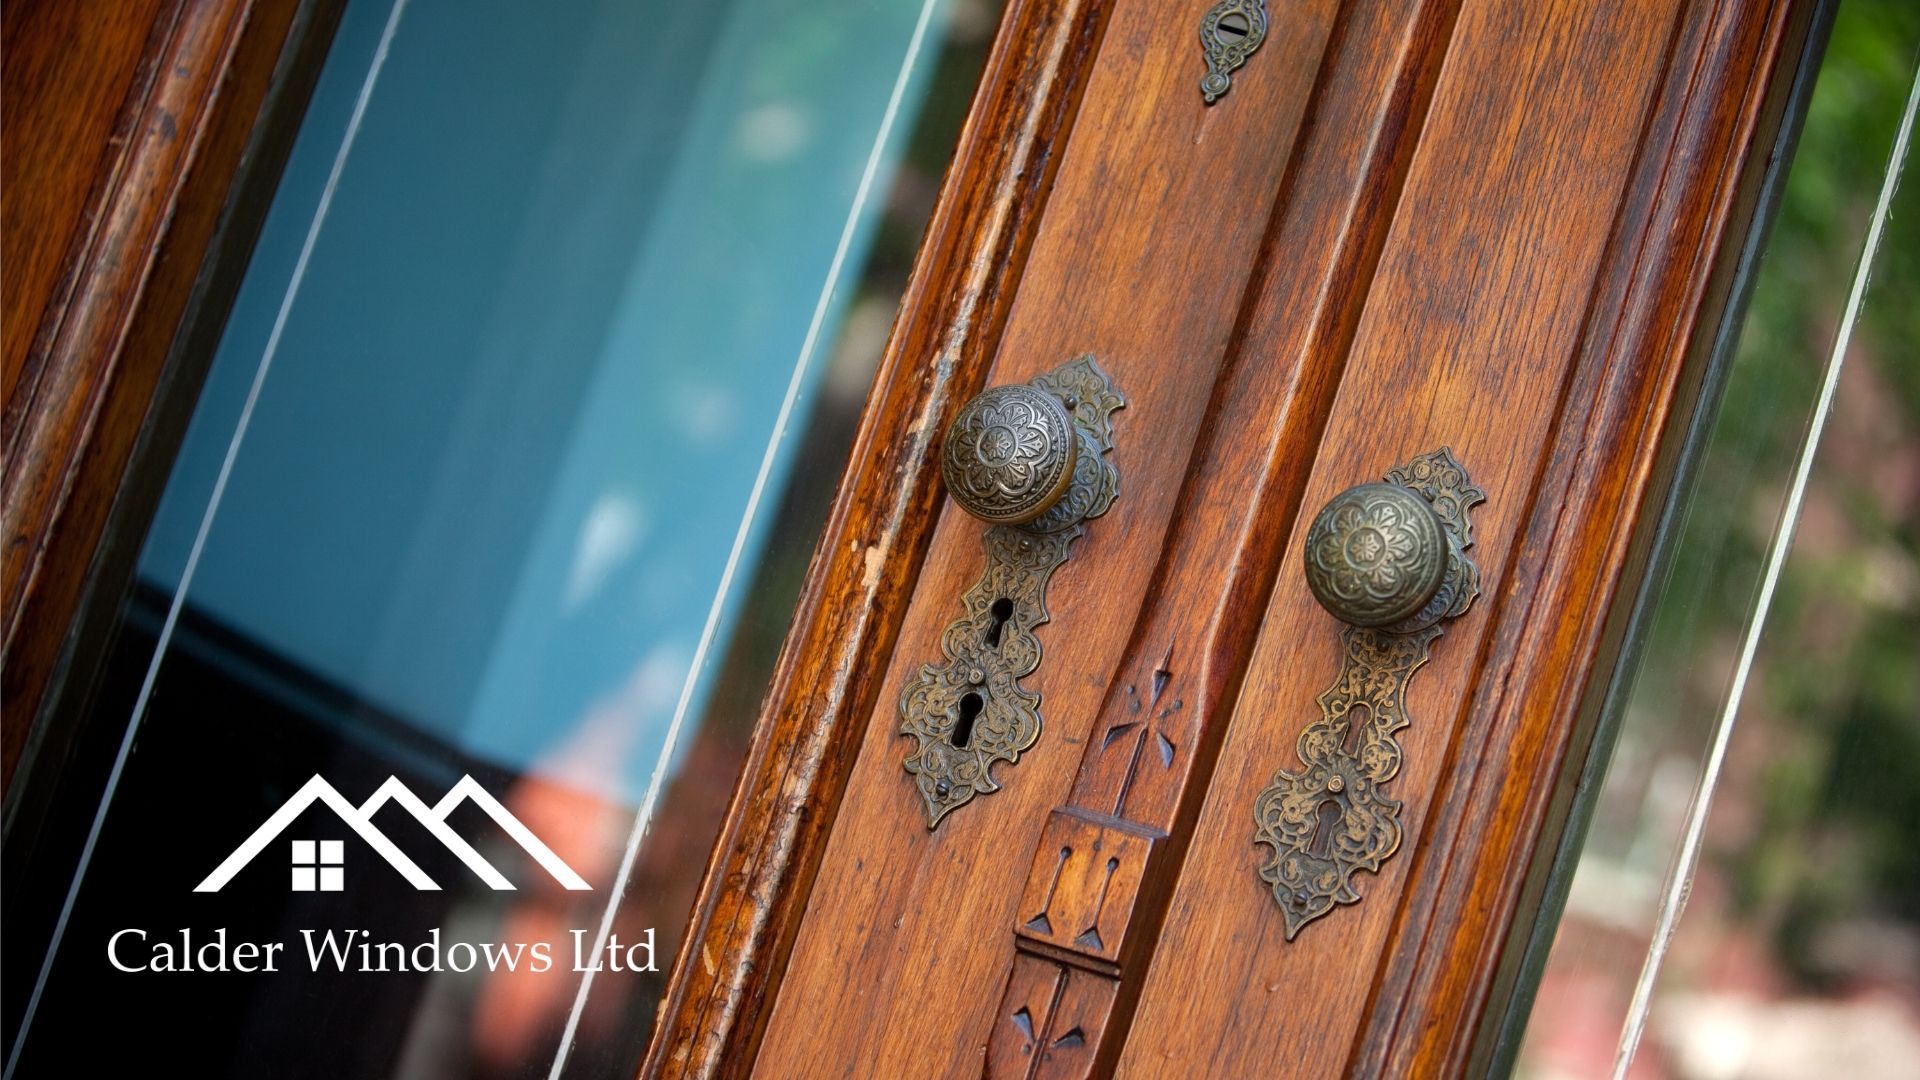 Thinking of getting some doors with glass windows but don't know where to start? Learn about the most common options in our handy guide to door glass.
